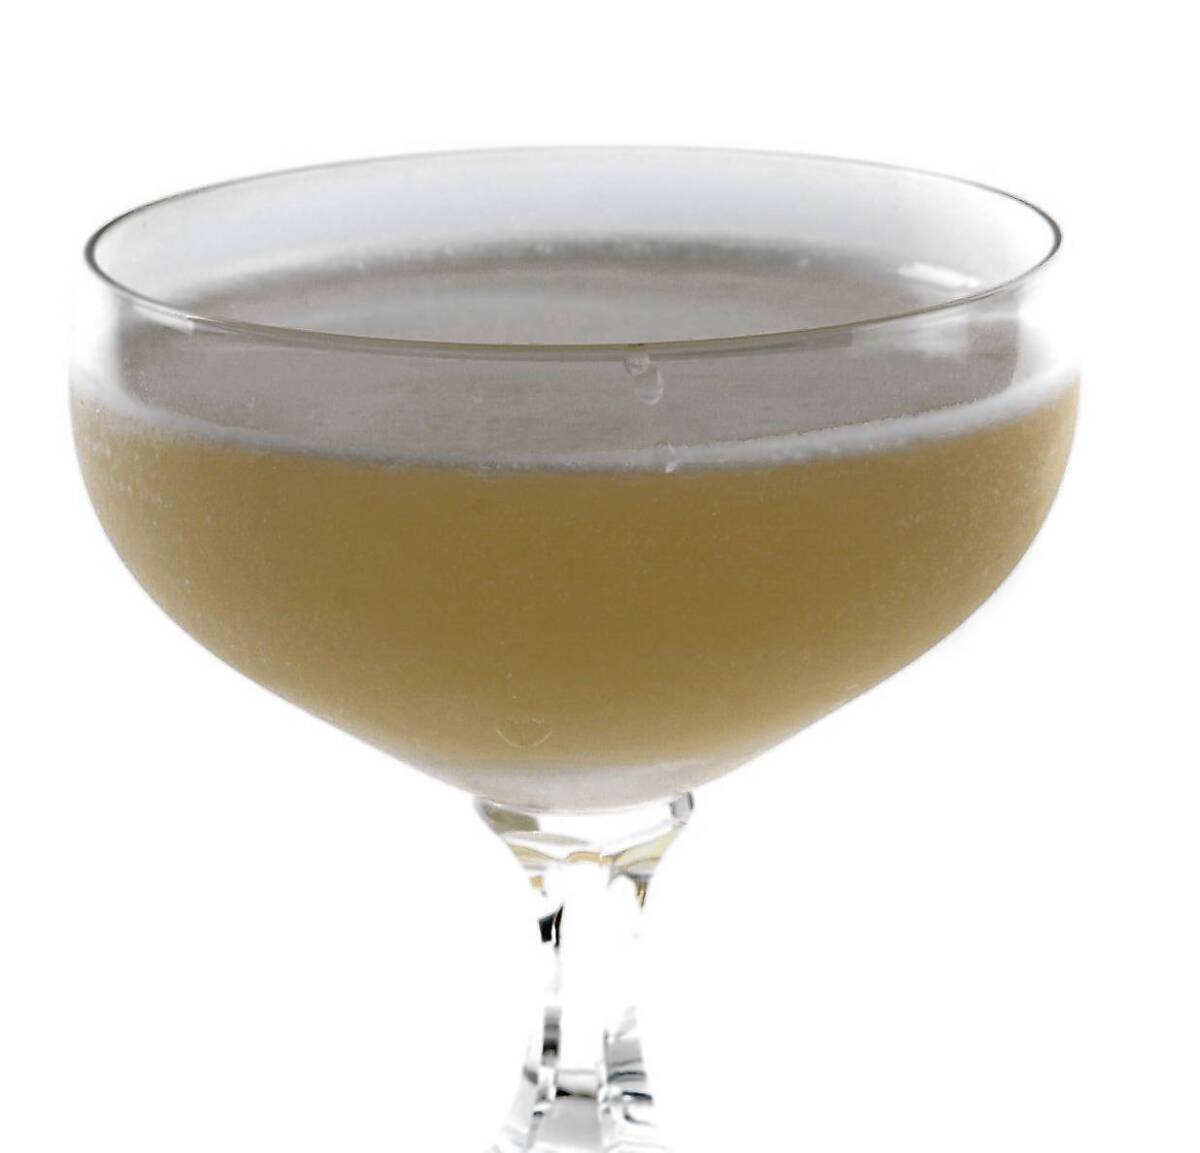 The Hotel Nacional, a rum creation by Dave Kupchinsky at Eveleigh. Recipe.